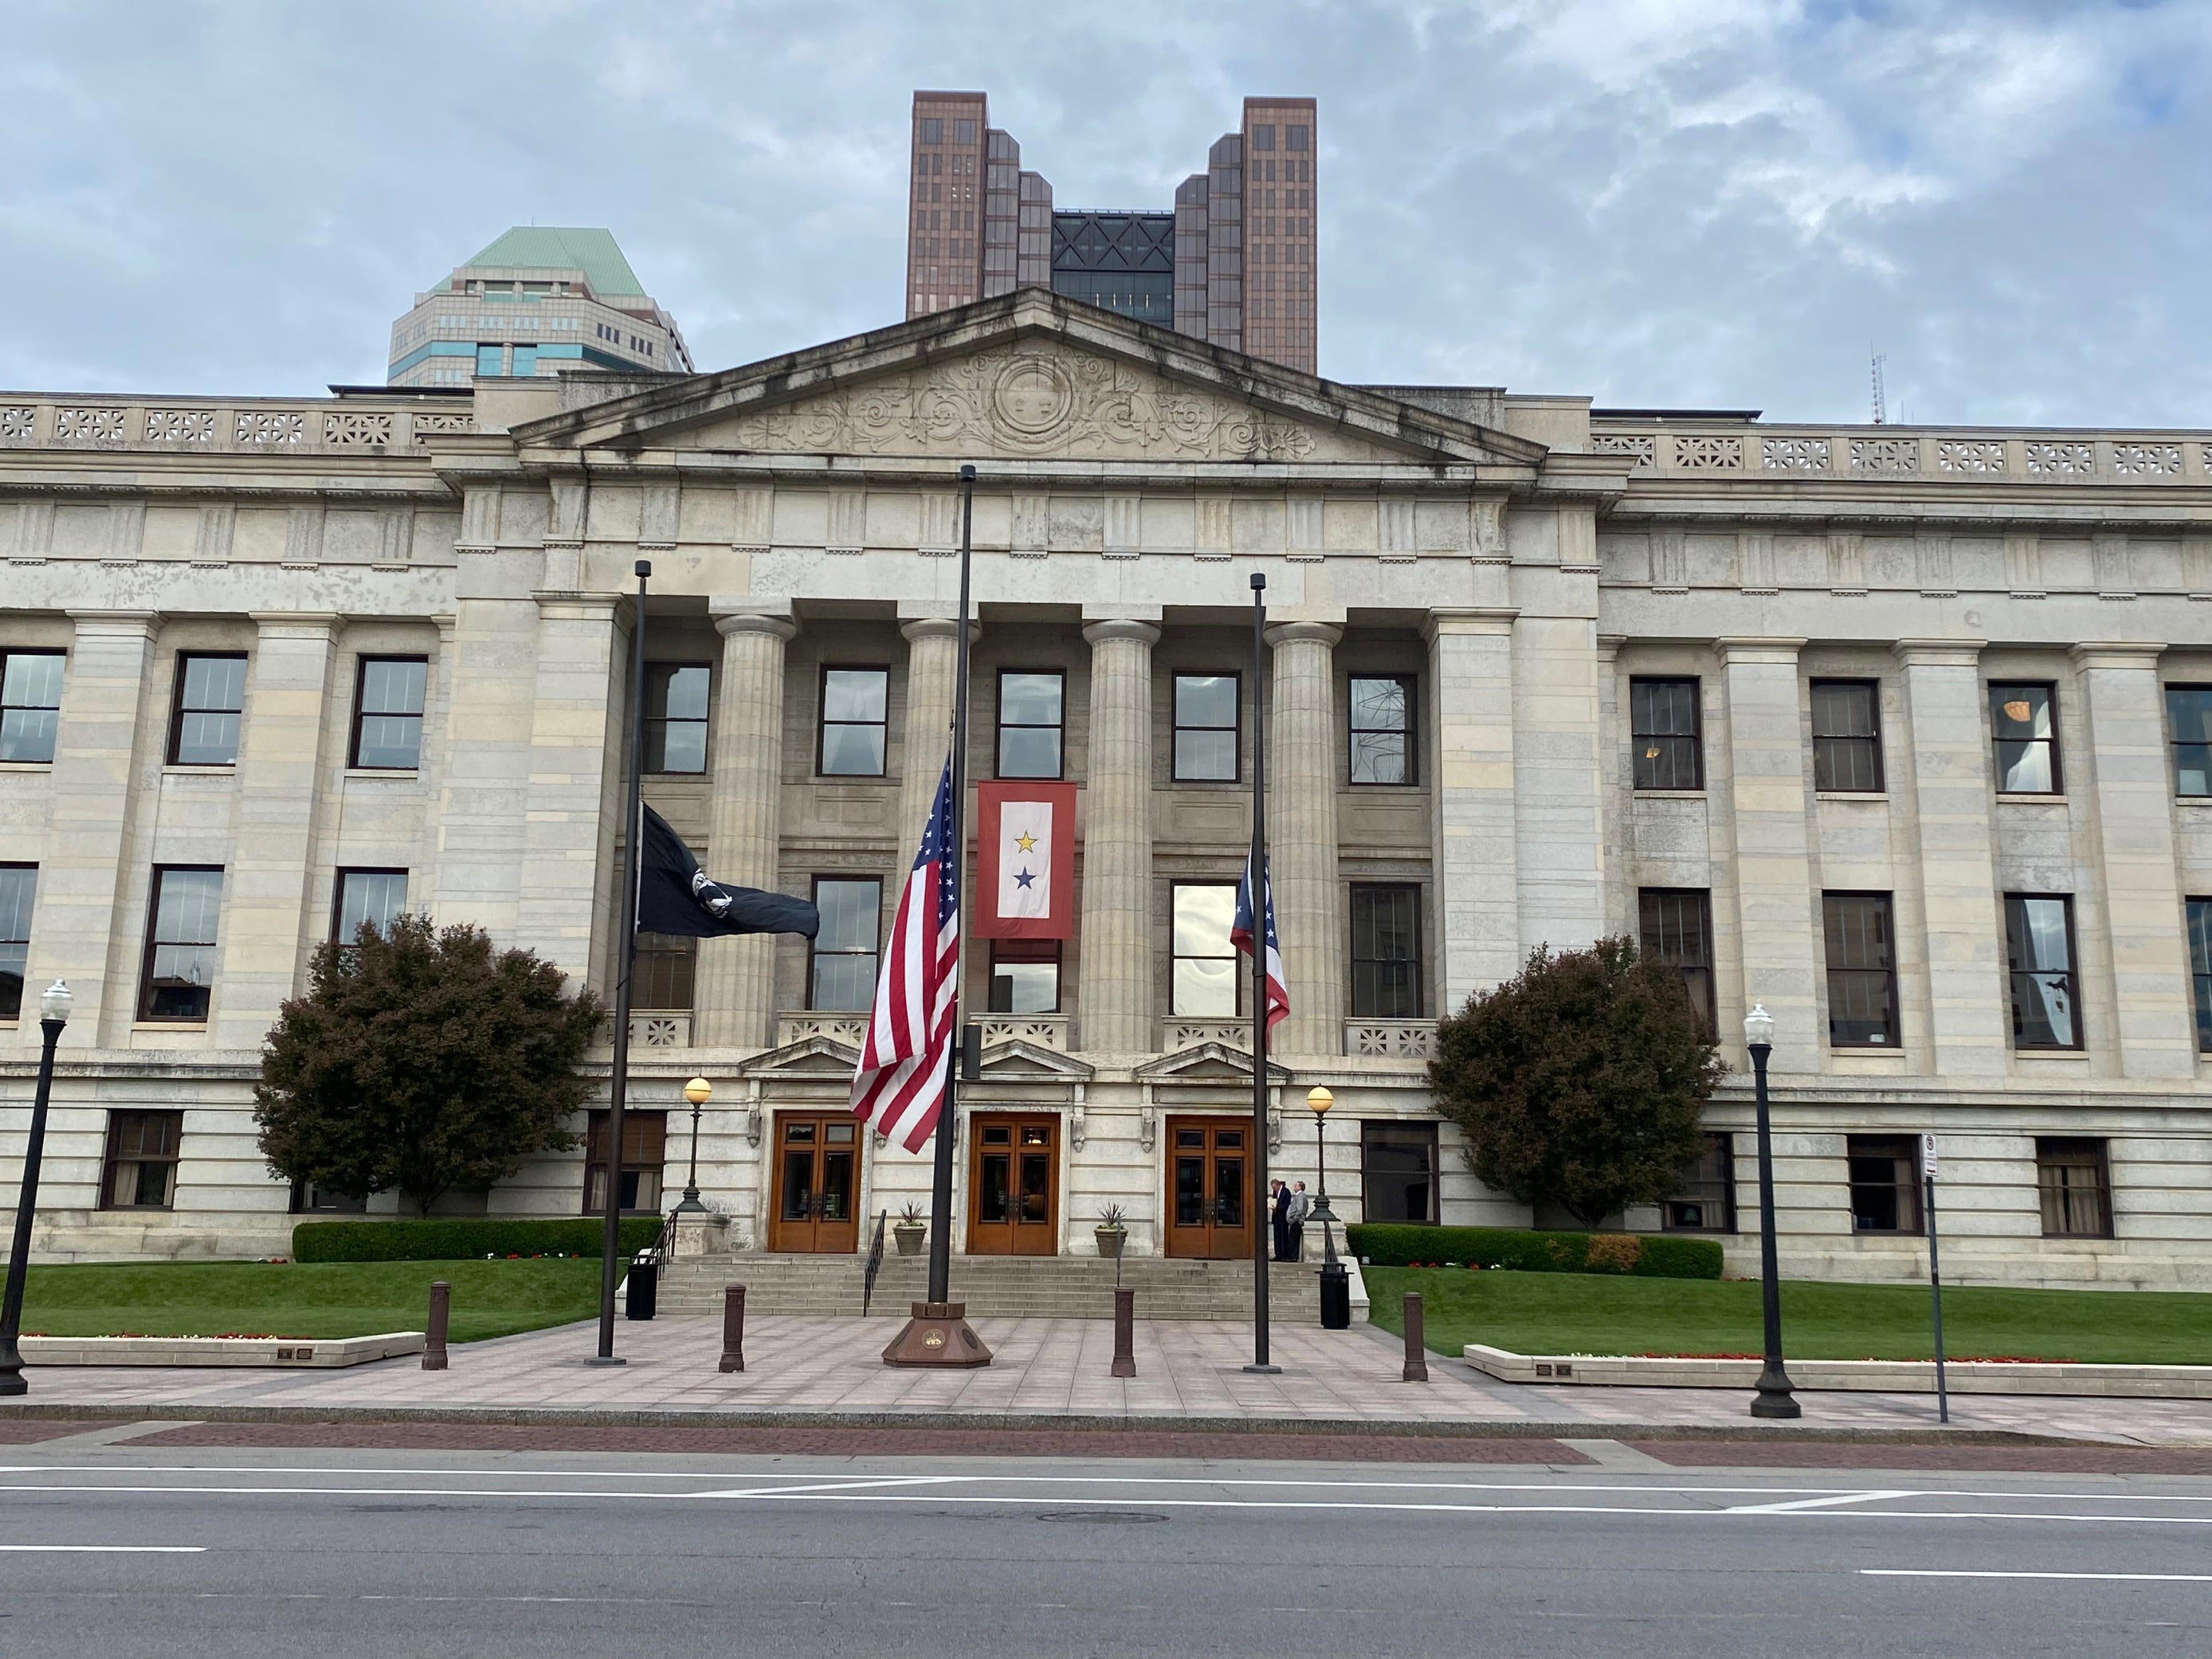 Why flags are flying at halfstaff, halfmast in Ohio today